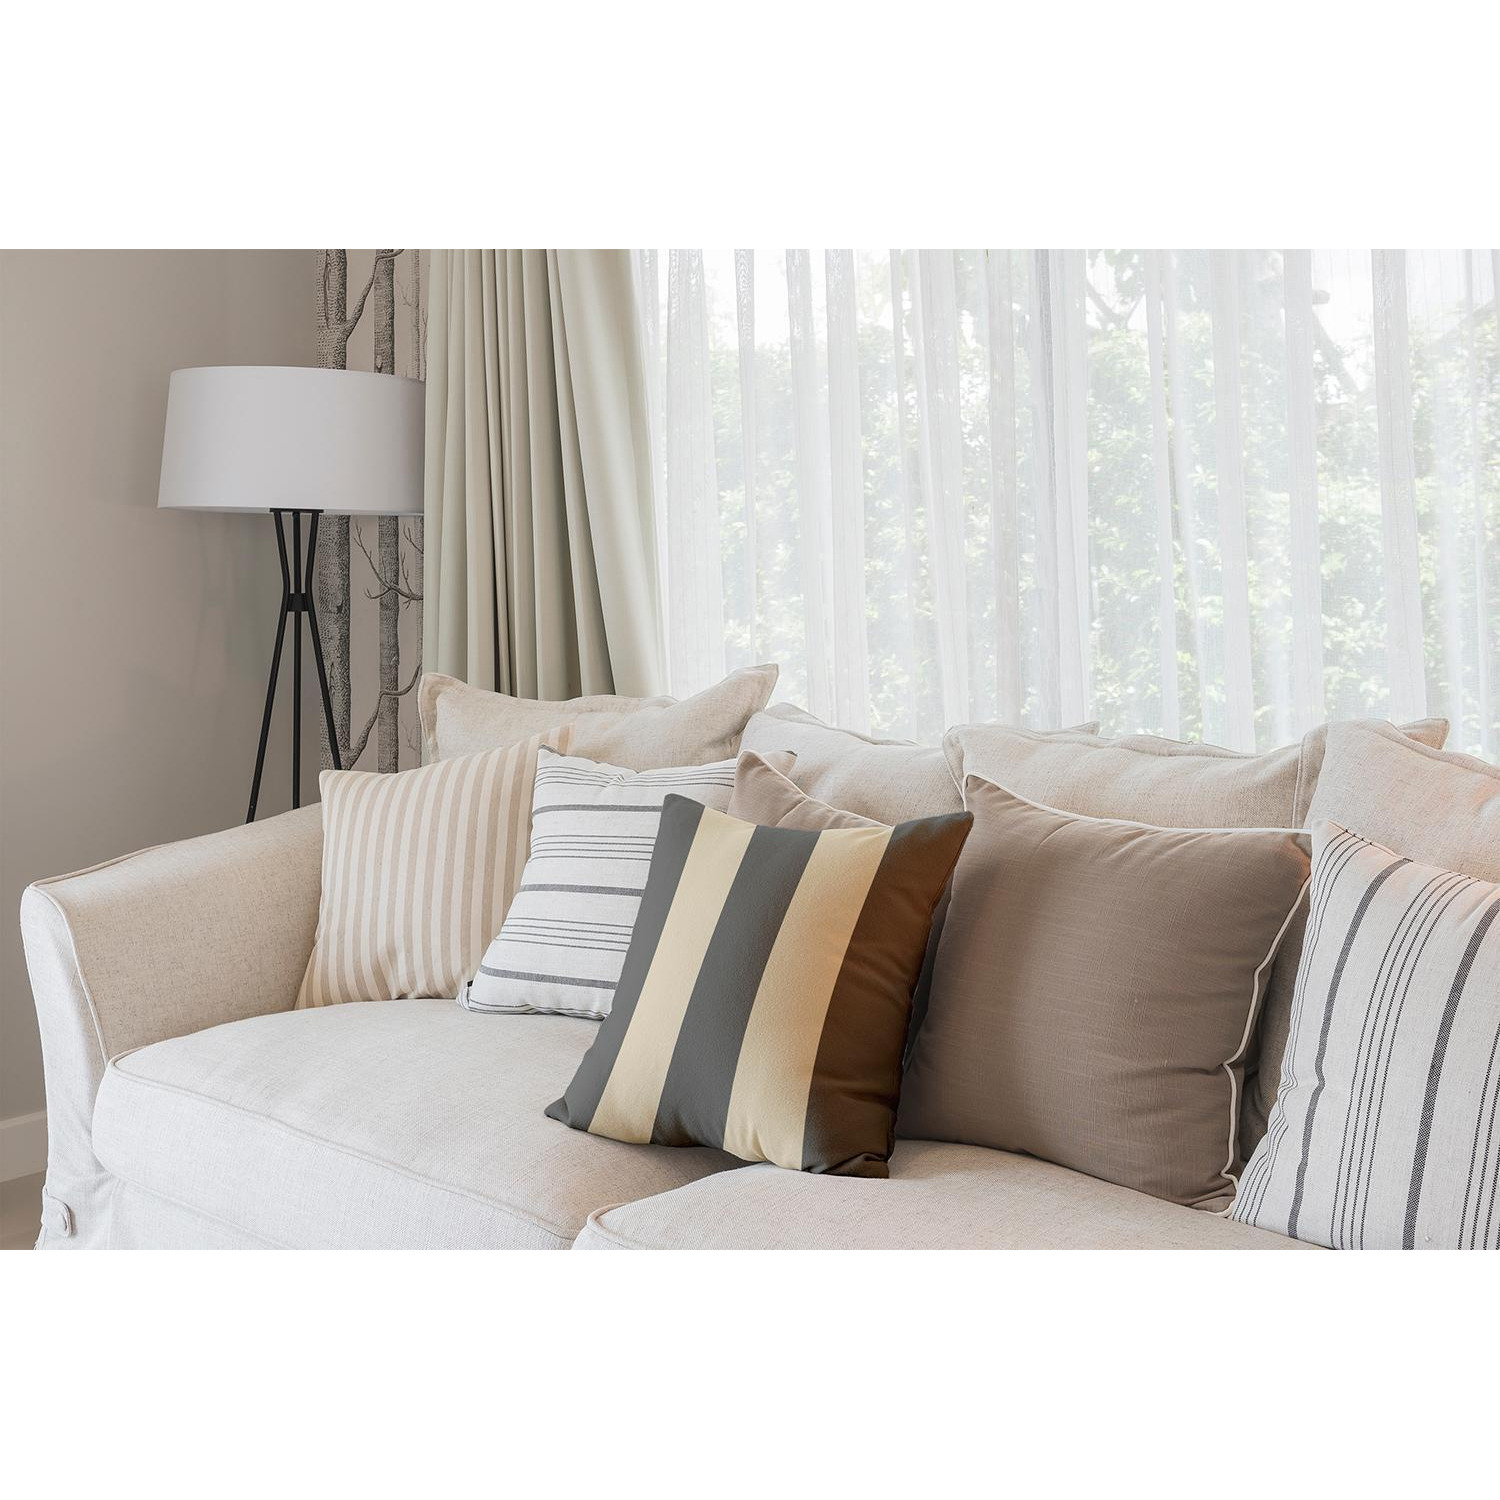 26" x 26" Gray and Beige Bold & Vertical Stripe Throw Pillow alternate image